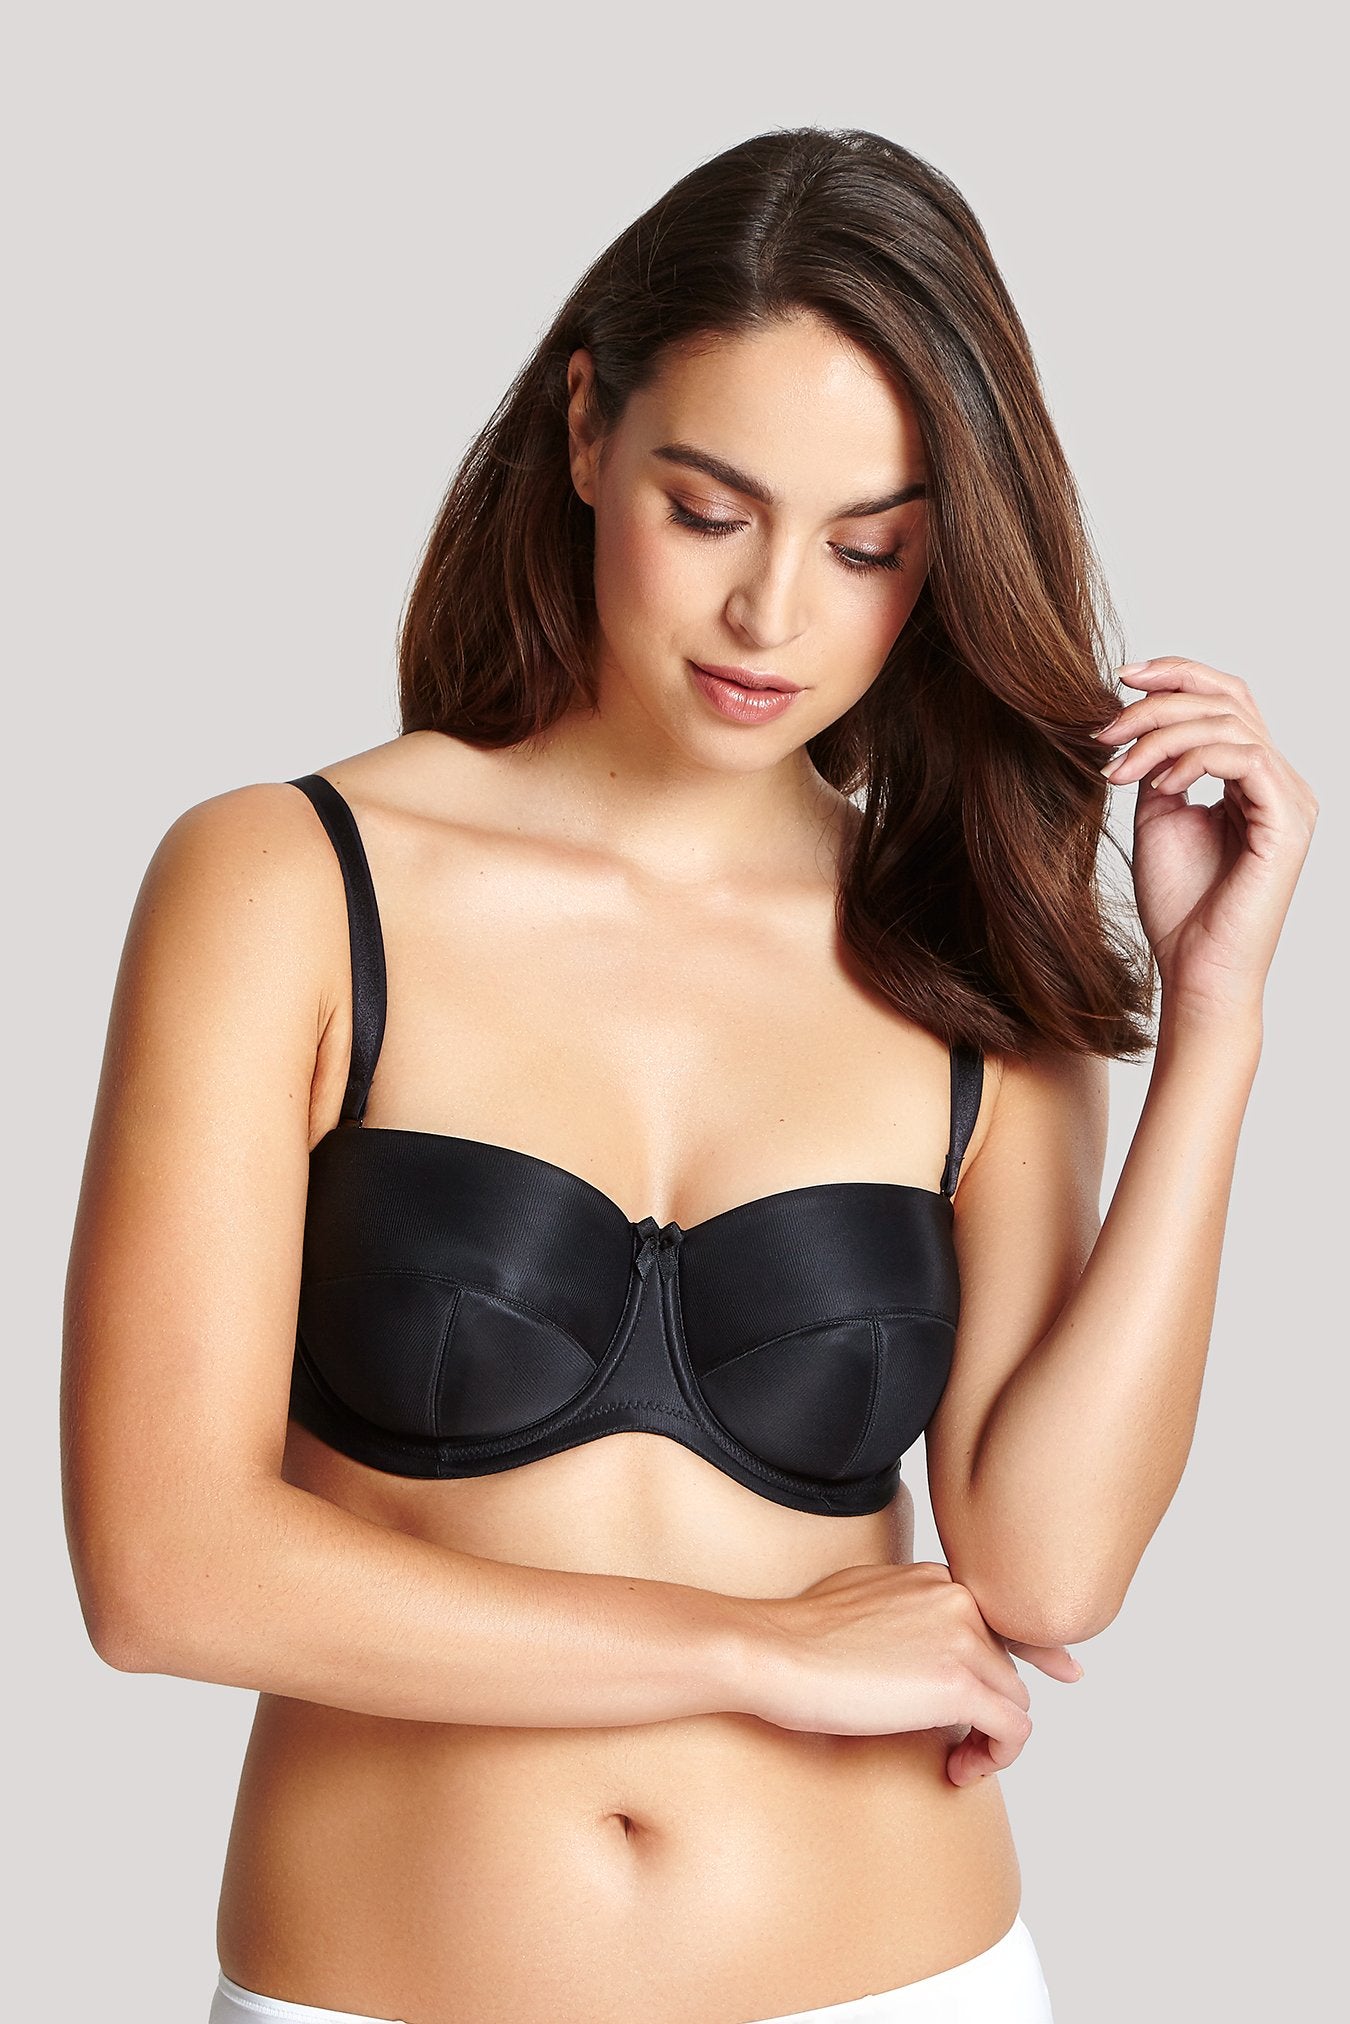 Panache Evie - Strapless Underwire Bra  Available at Illusions Lingerie